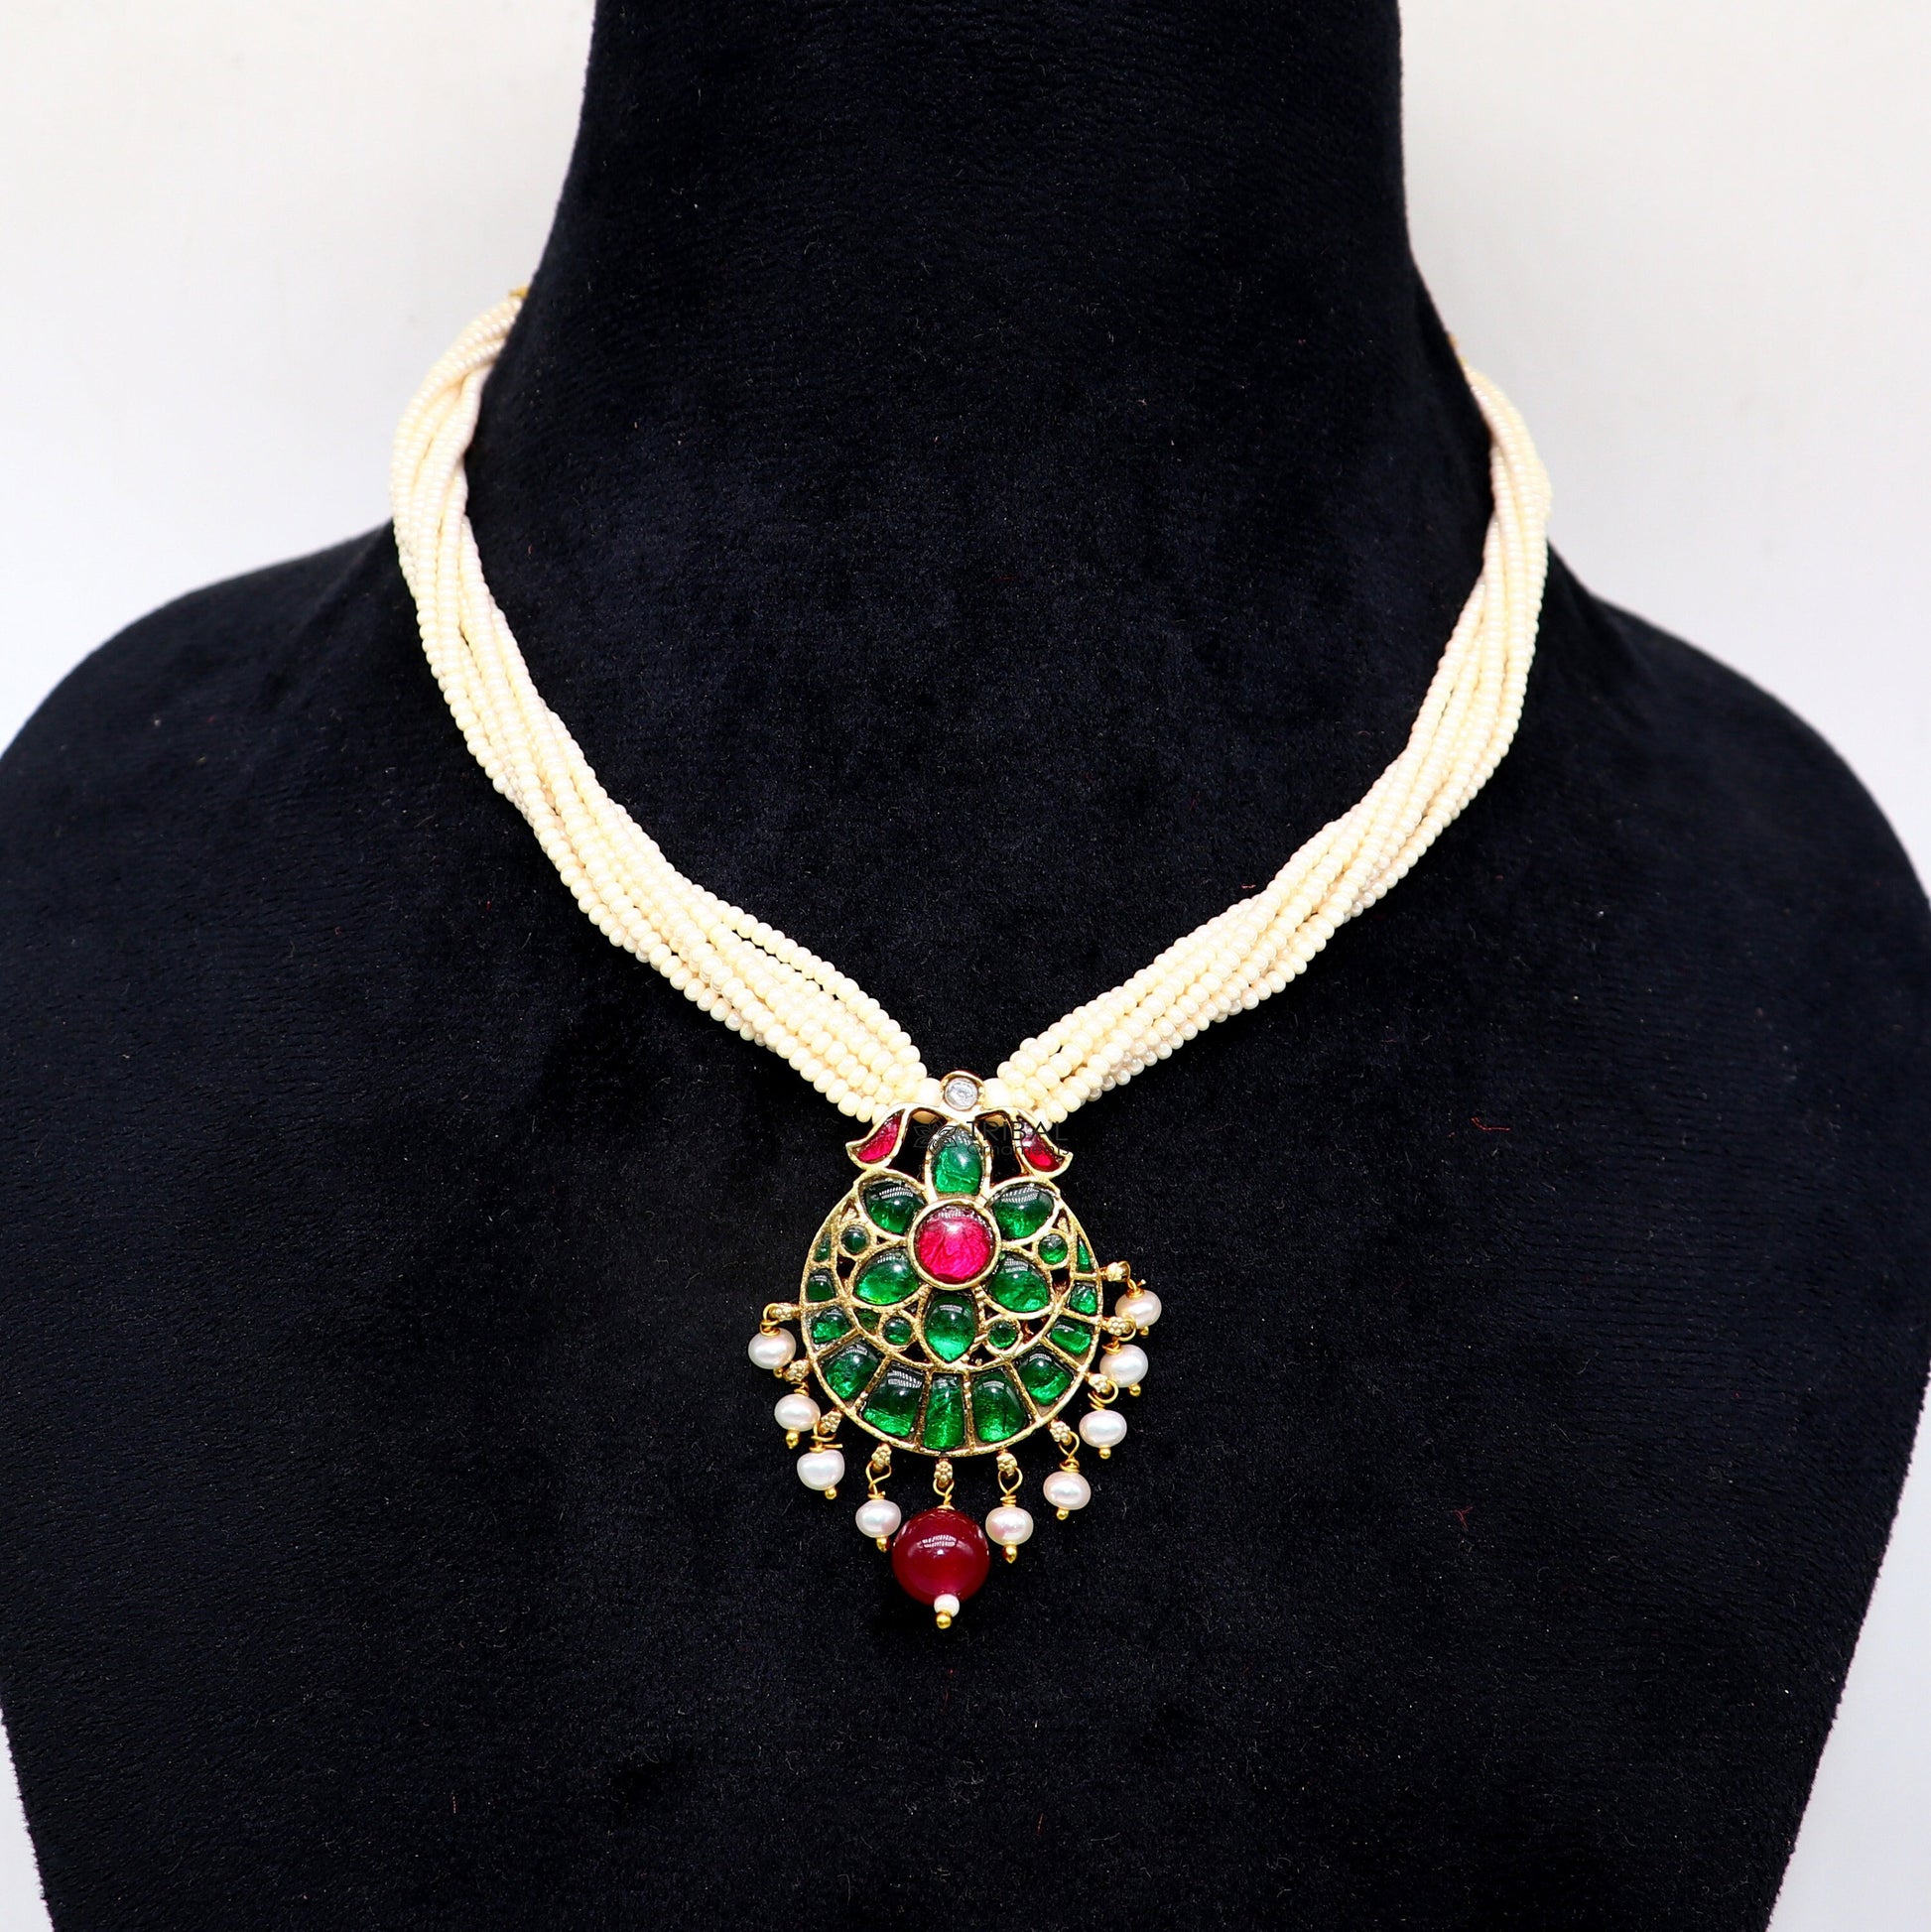 92.5 sterling silver India traditional cultural kundan work pendant trendy multiline pearls strings necklace peacock design jewelry set621 - TRIBAL ORNAMENTS